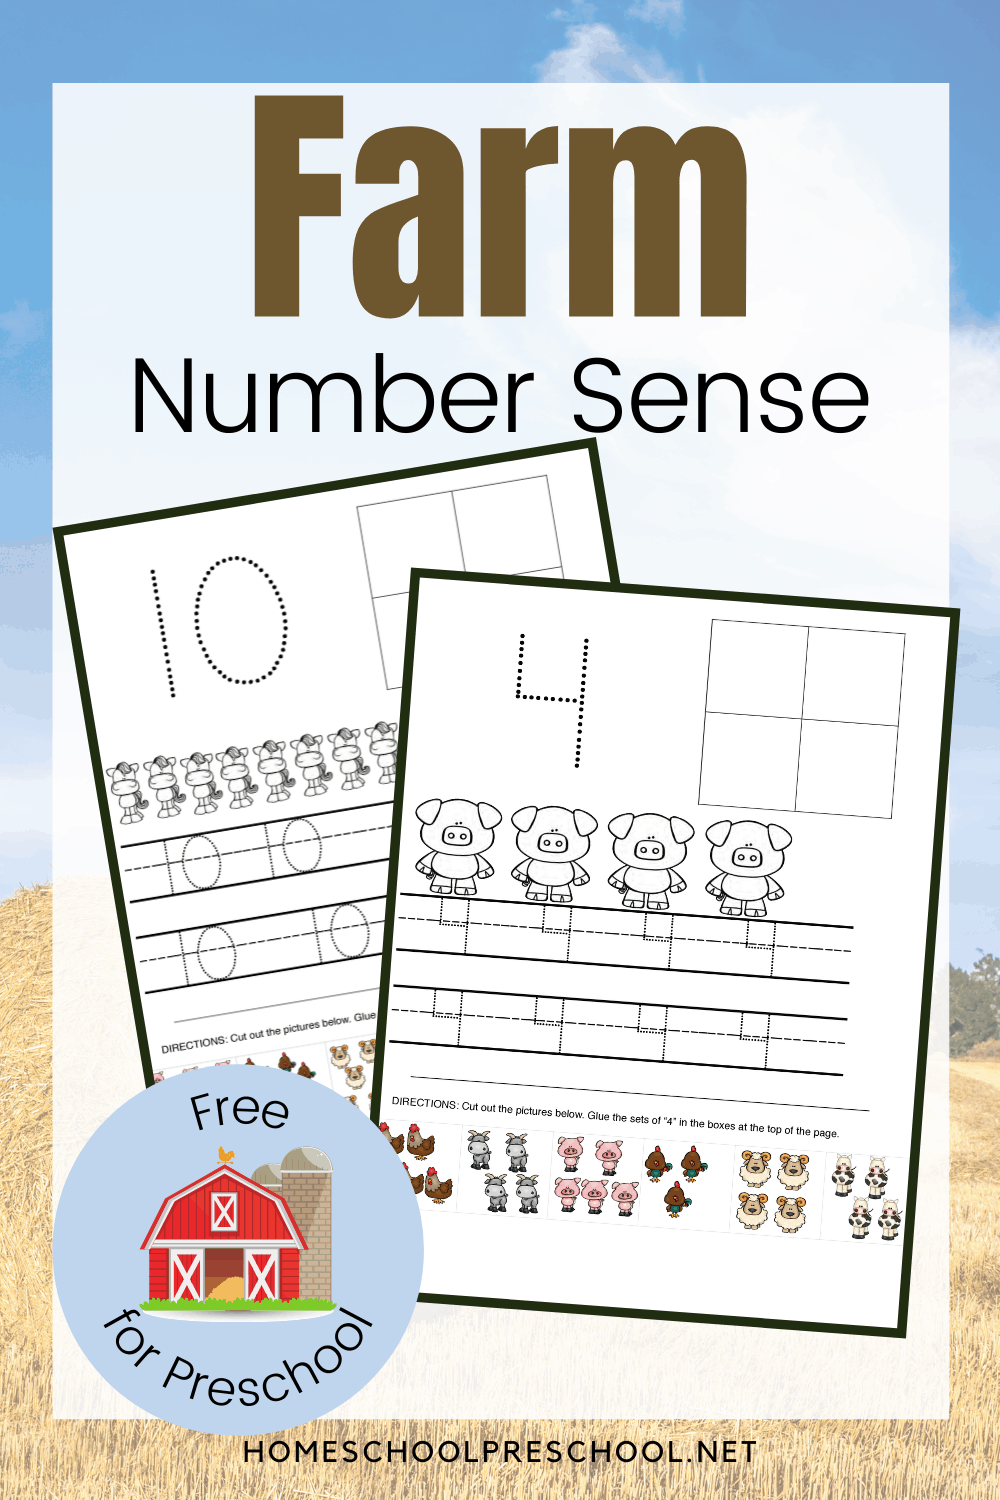 Farm Themed Number Sense Activity Pages